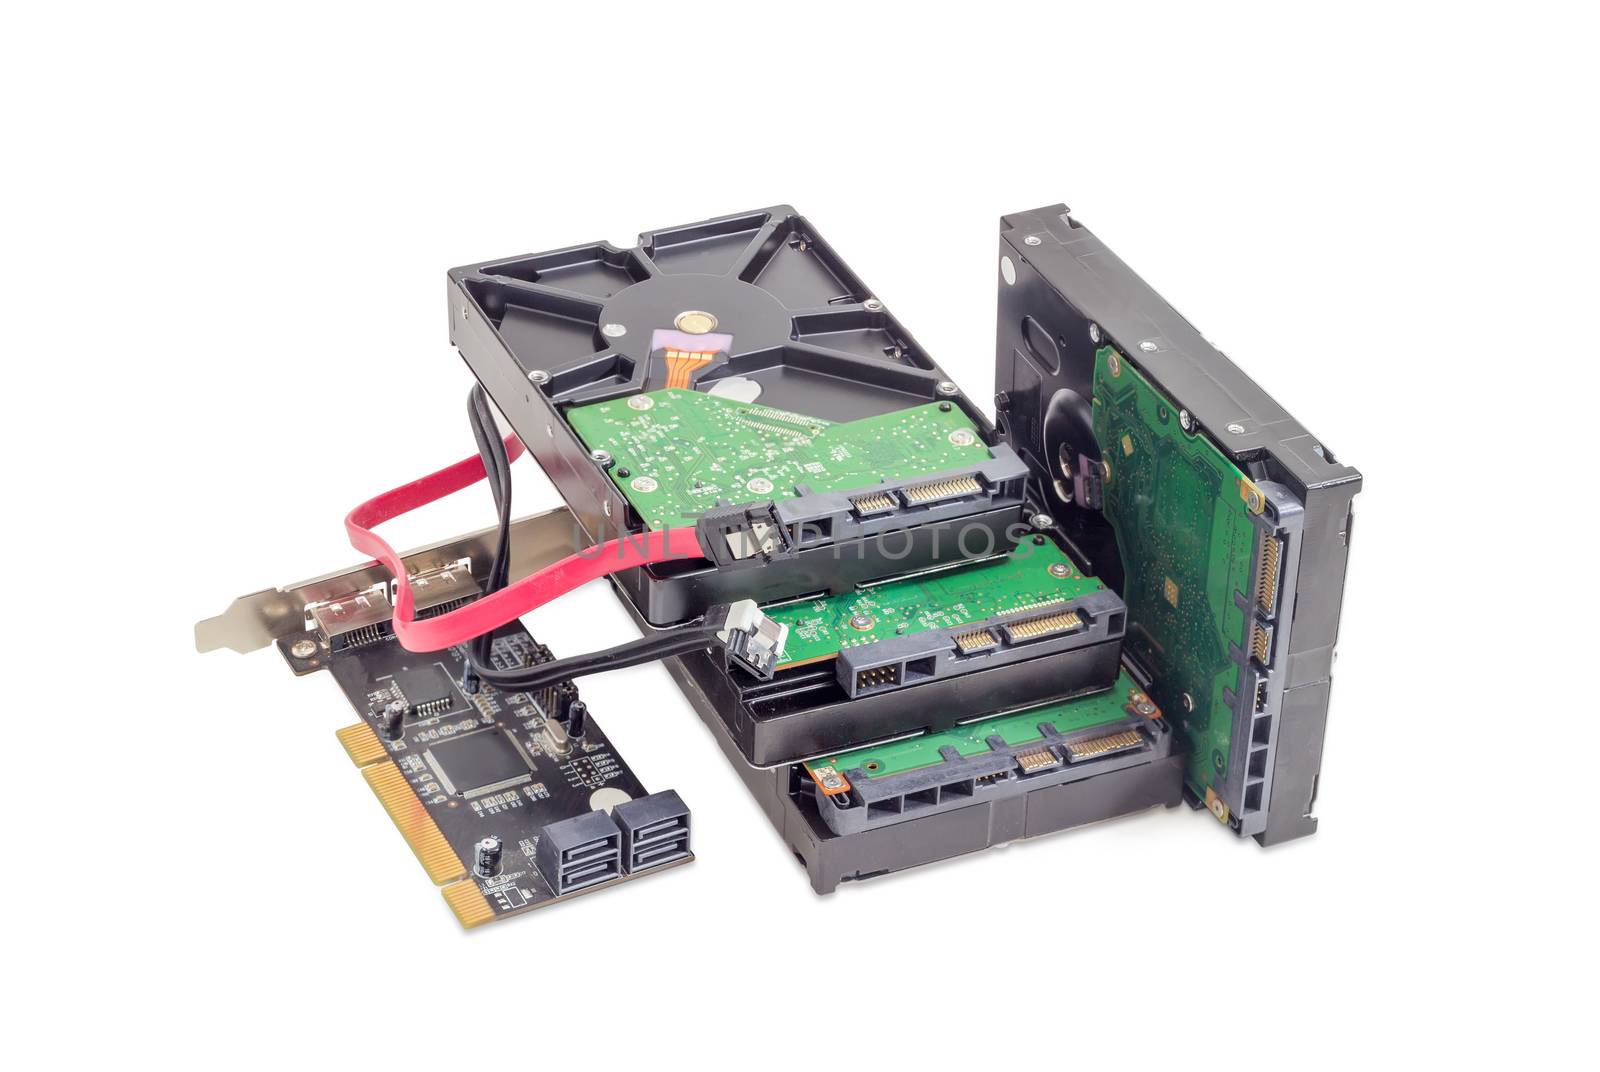 Hard disk drives, disk controller card and cables  by anmbph